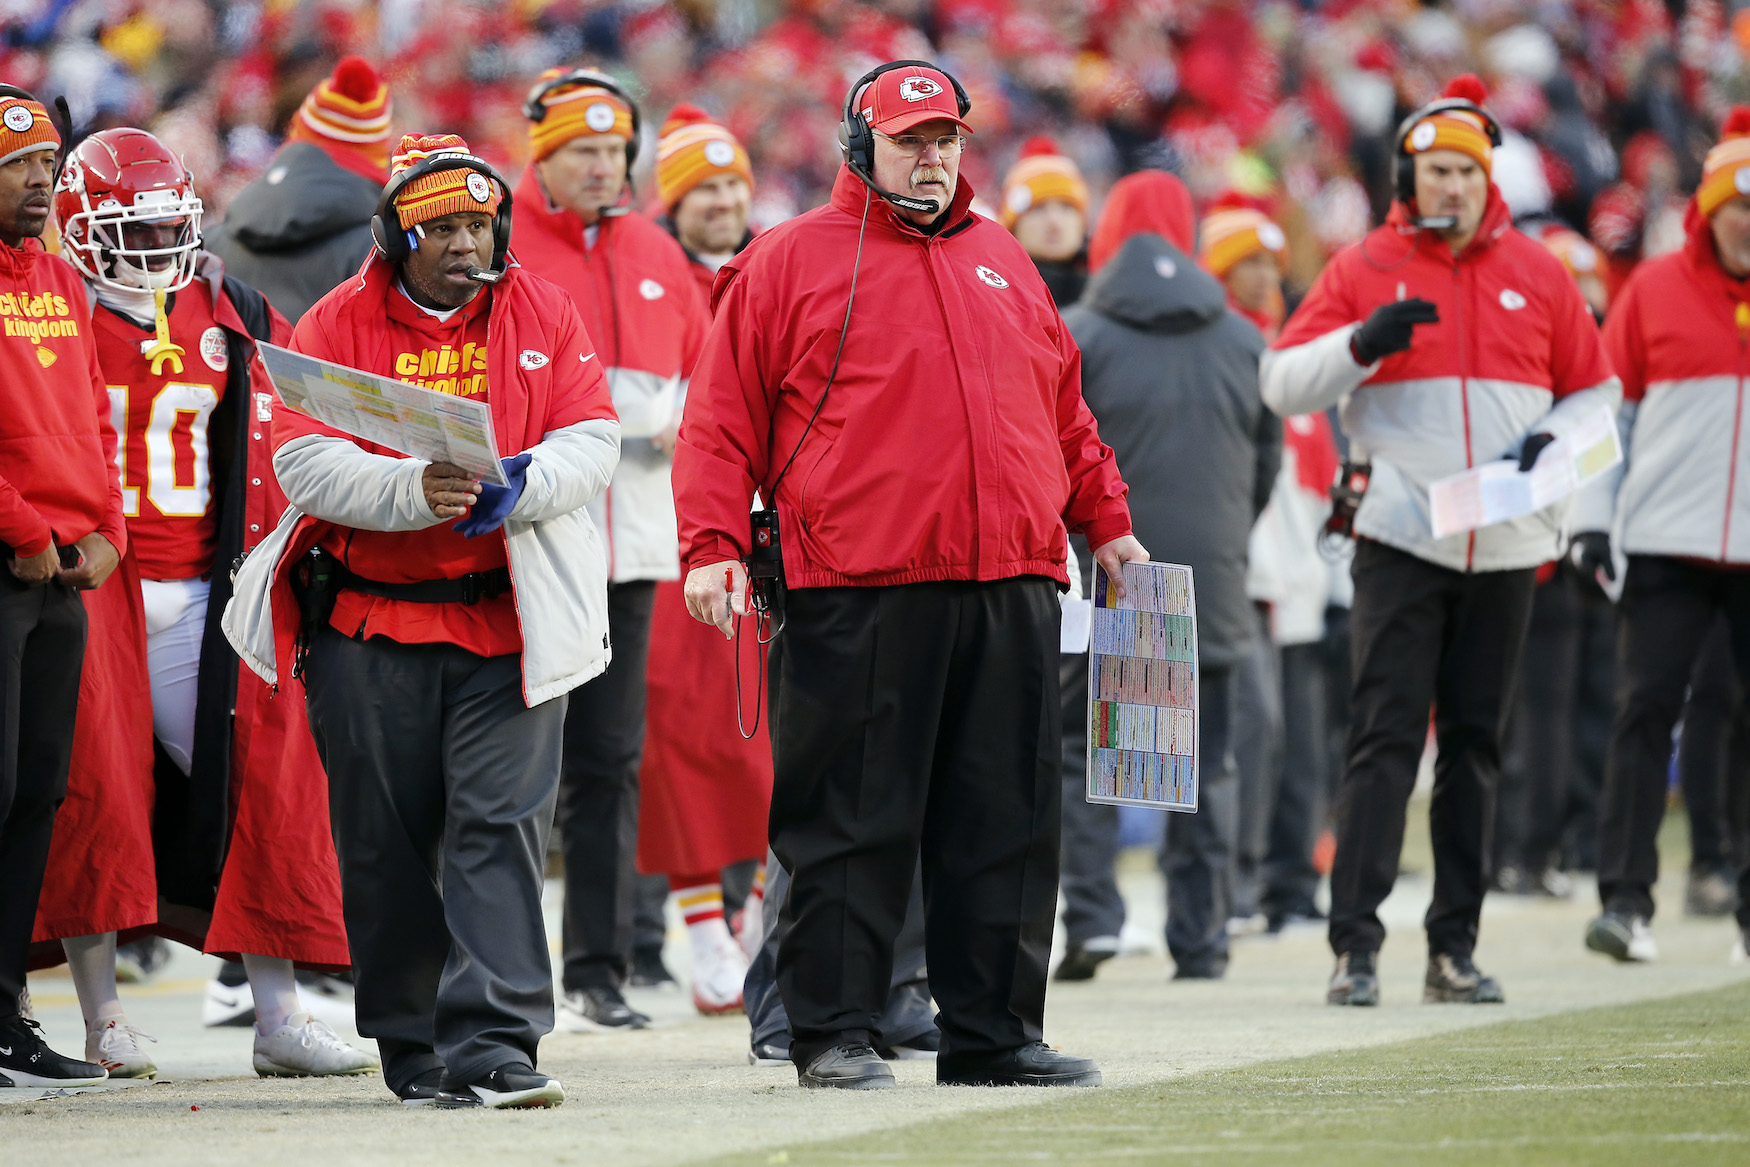 If we see NFL games in 2020, you can thank Kansas City Chiefs head coach Andy Reid.